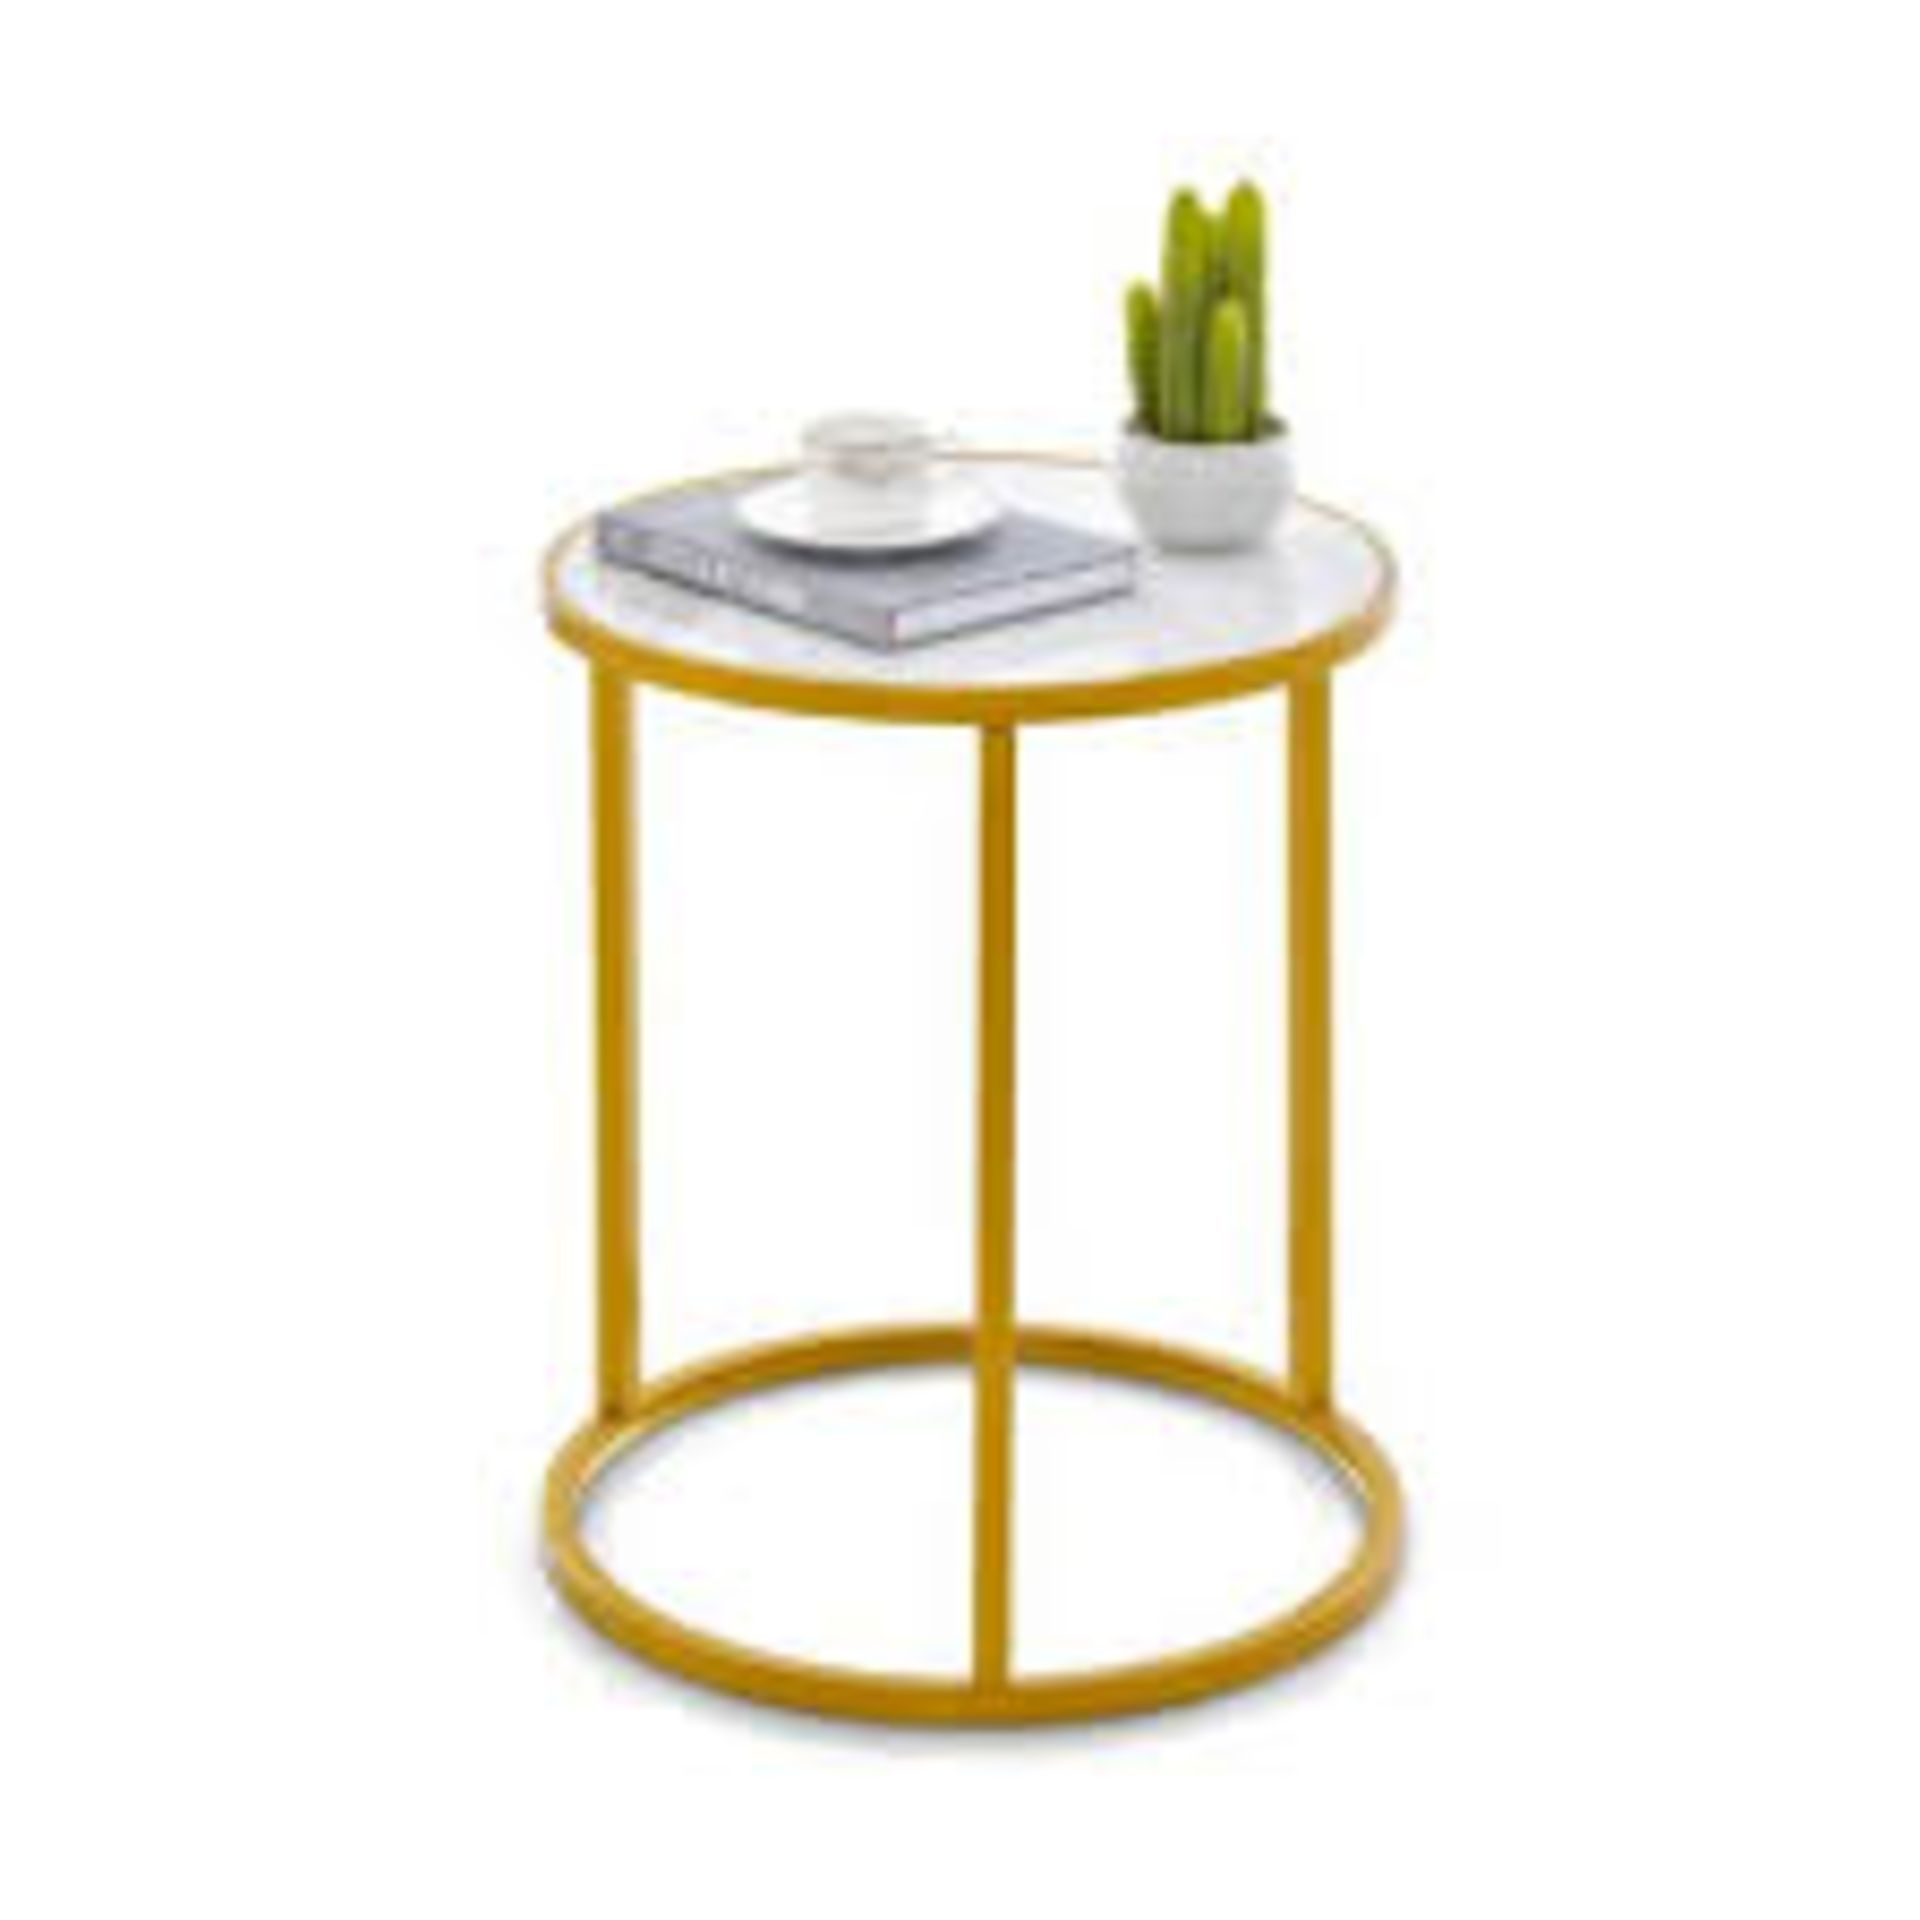 Marble Top Round Side Table with Golden Metal Frame. - R14.14. Featuring a white marble top and a